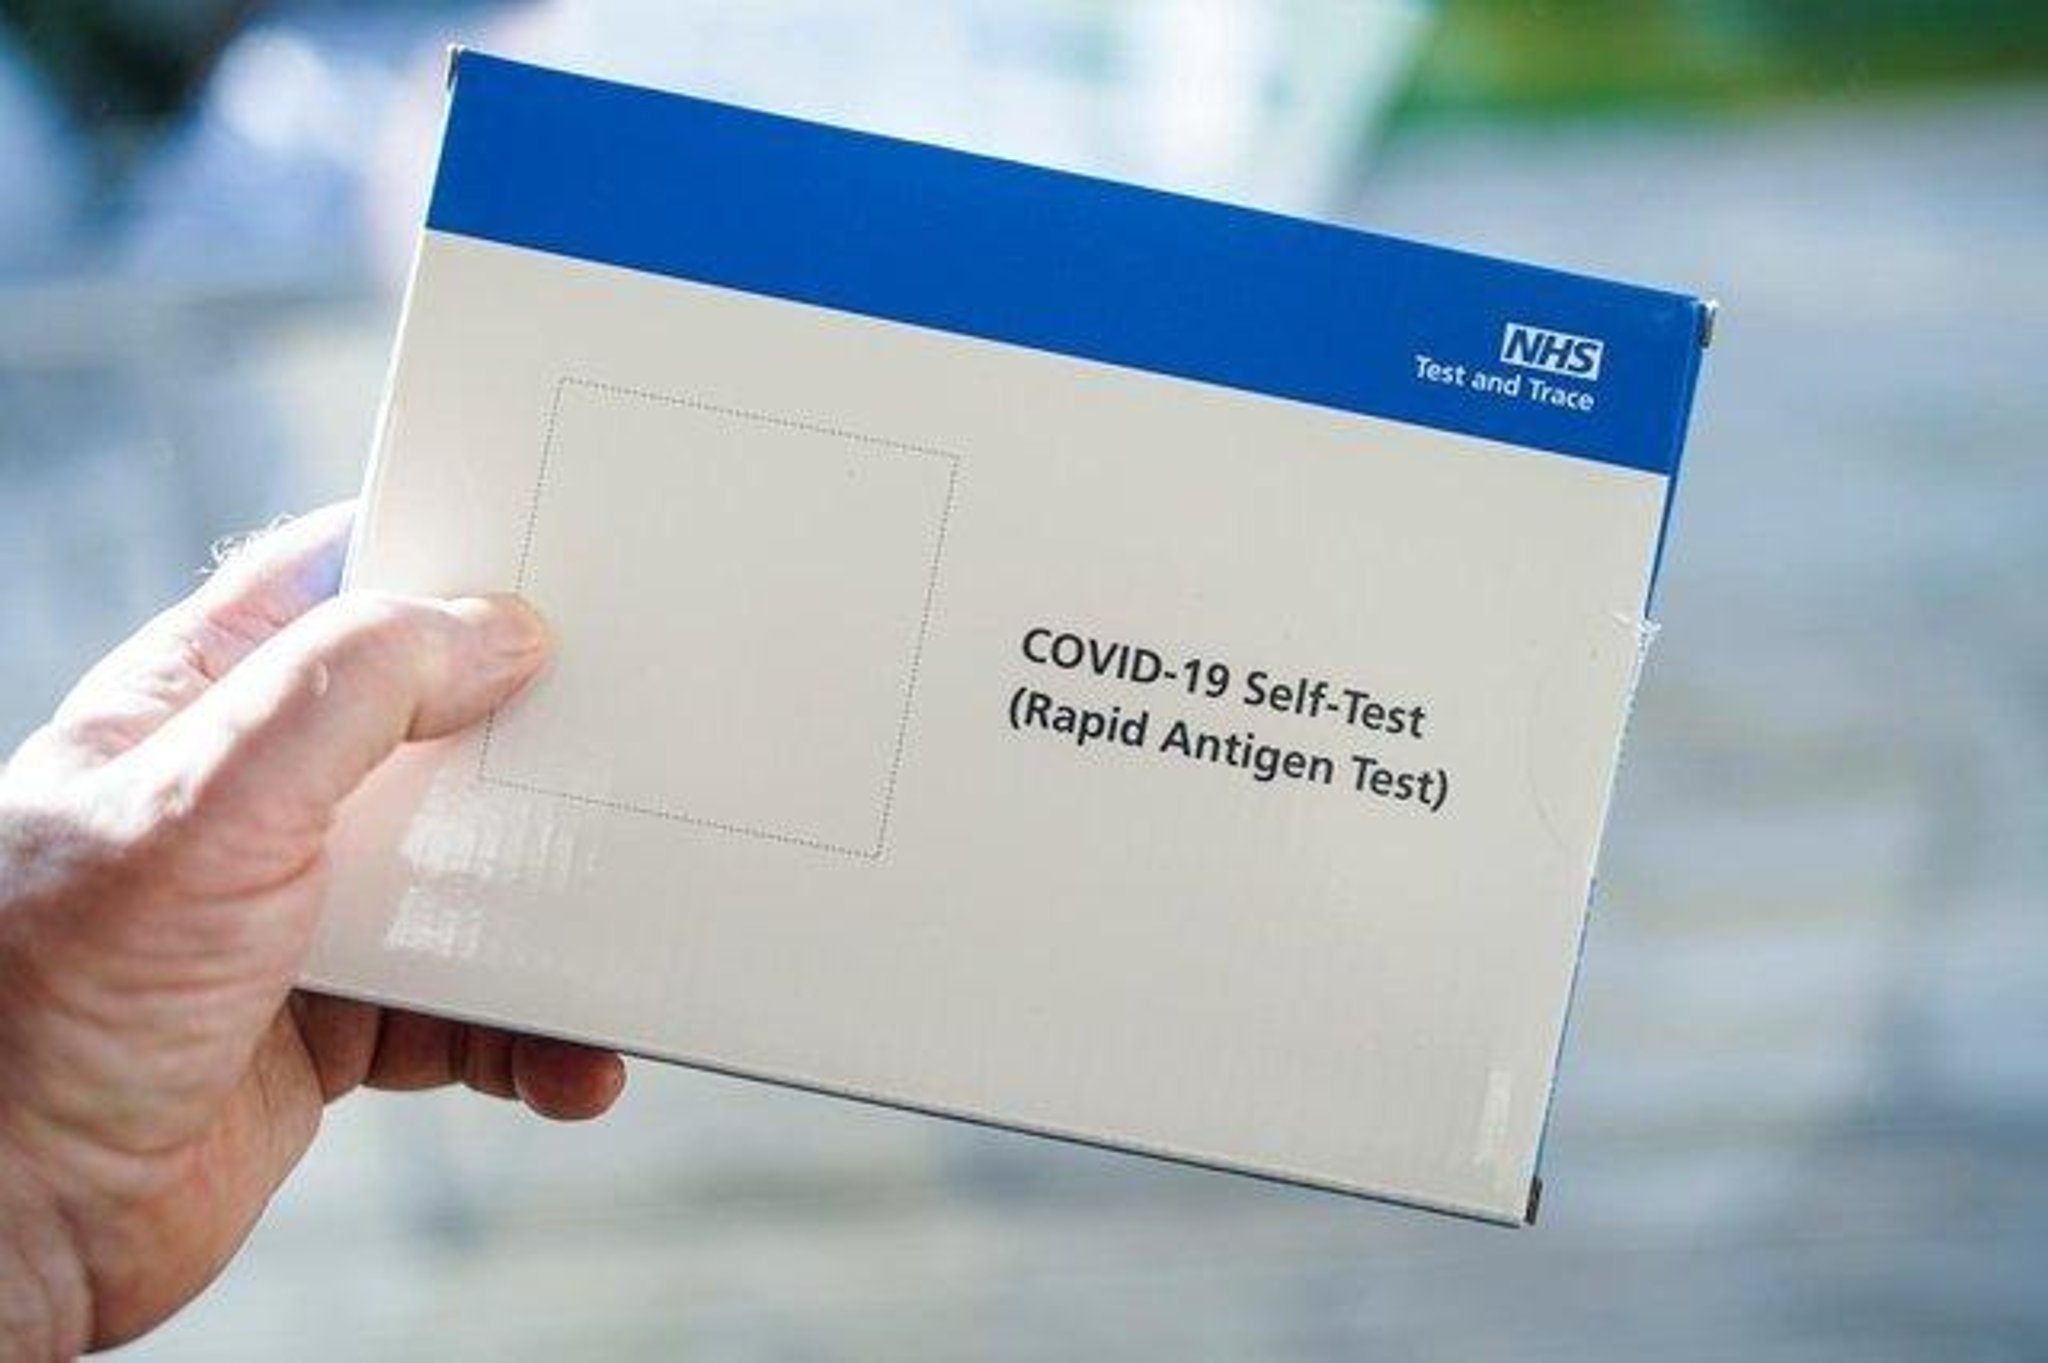 List of Covid symptoms expanded: here are the nine new signs of coronavirus